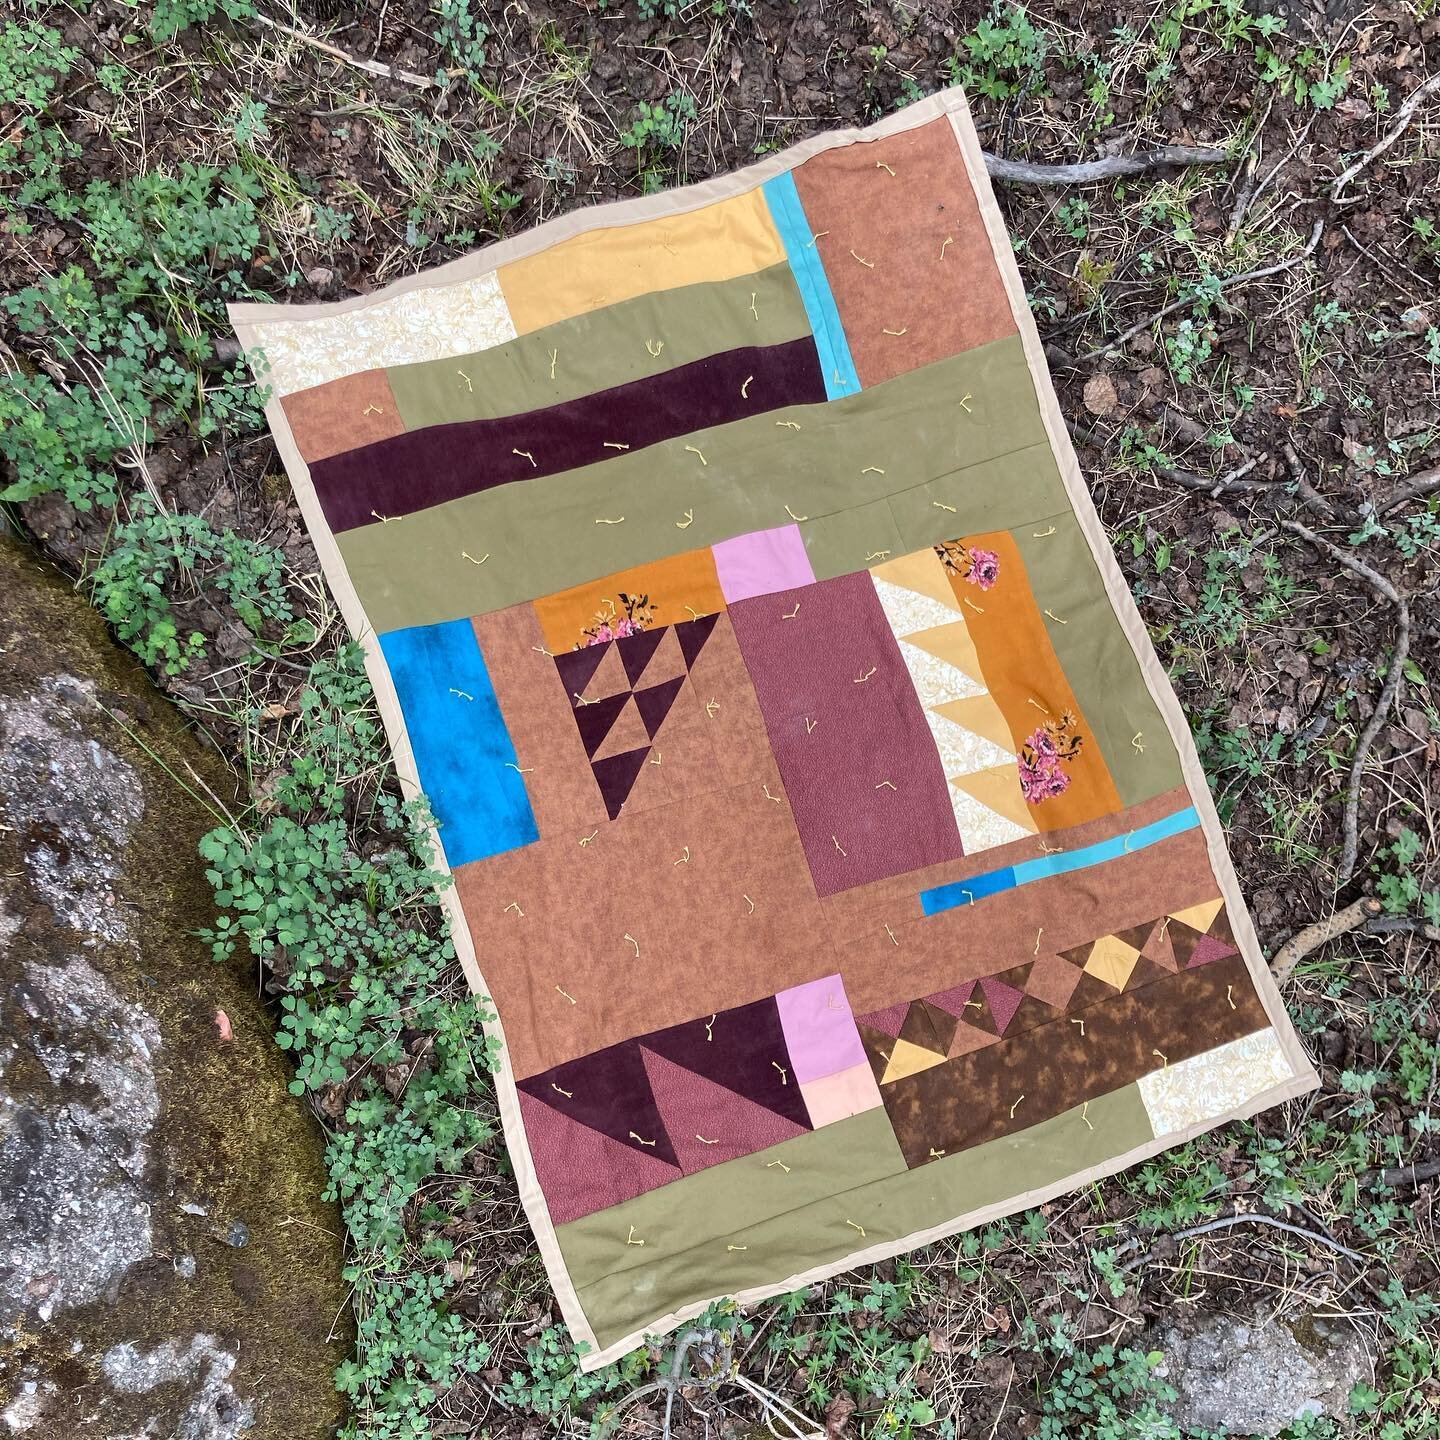 Day 93 &amp; 94 of 100 

I made this quilt pulling colors and textures from memory, the velvet of moss, the bright pops of lichen, loamy browns and purples, first yellow flowers marking spring turning into summer. 
🌿
I made this quilt piecing memori